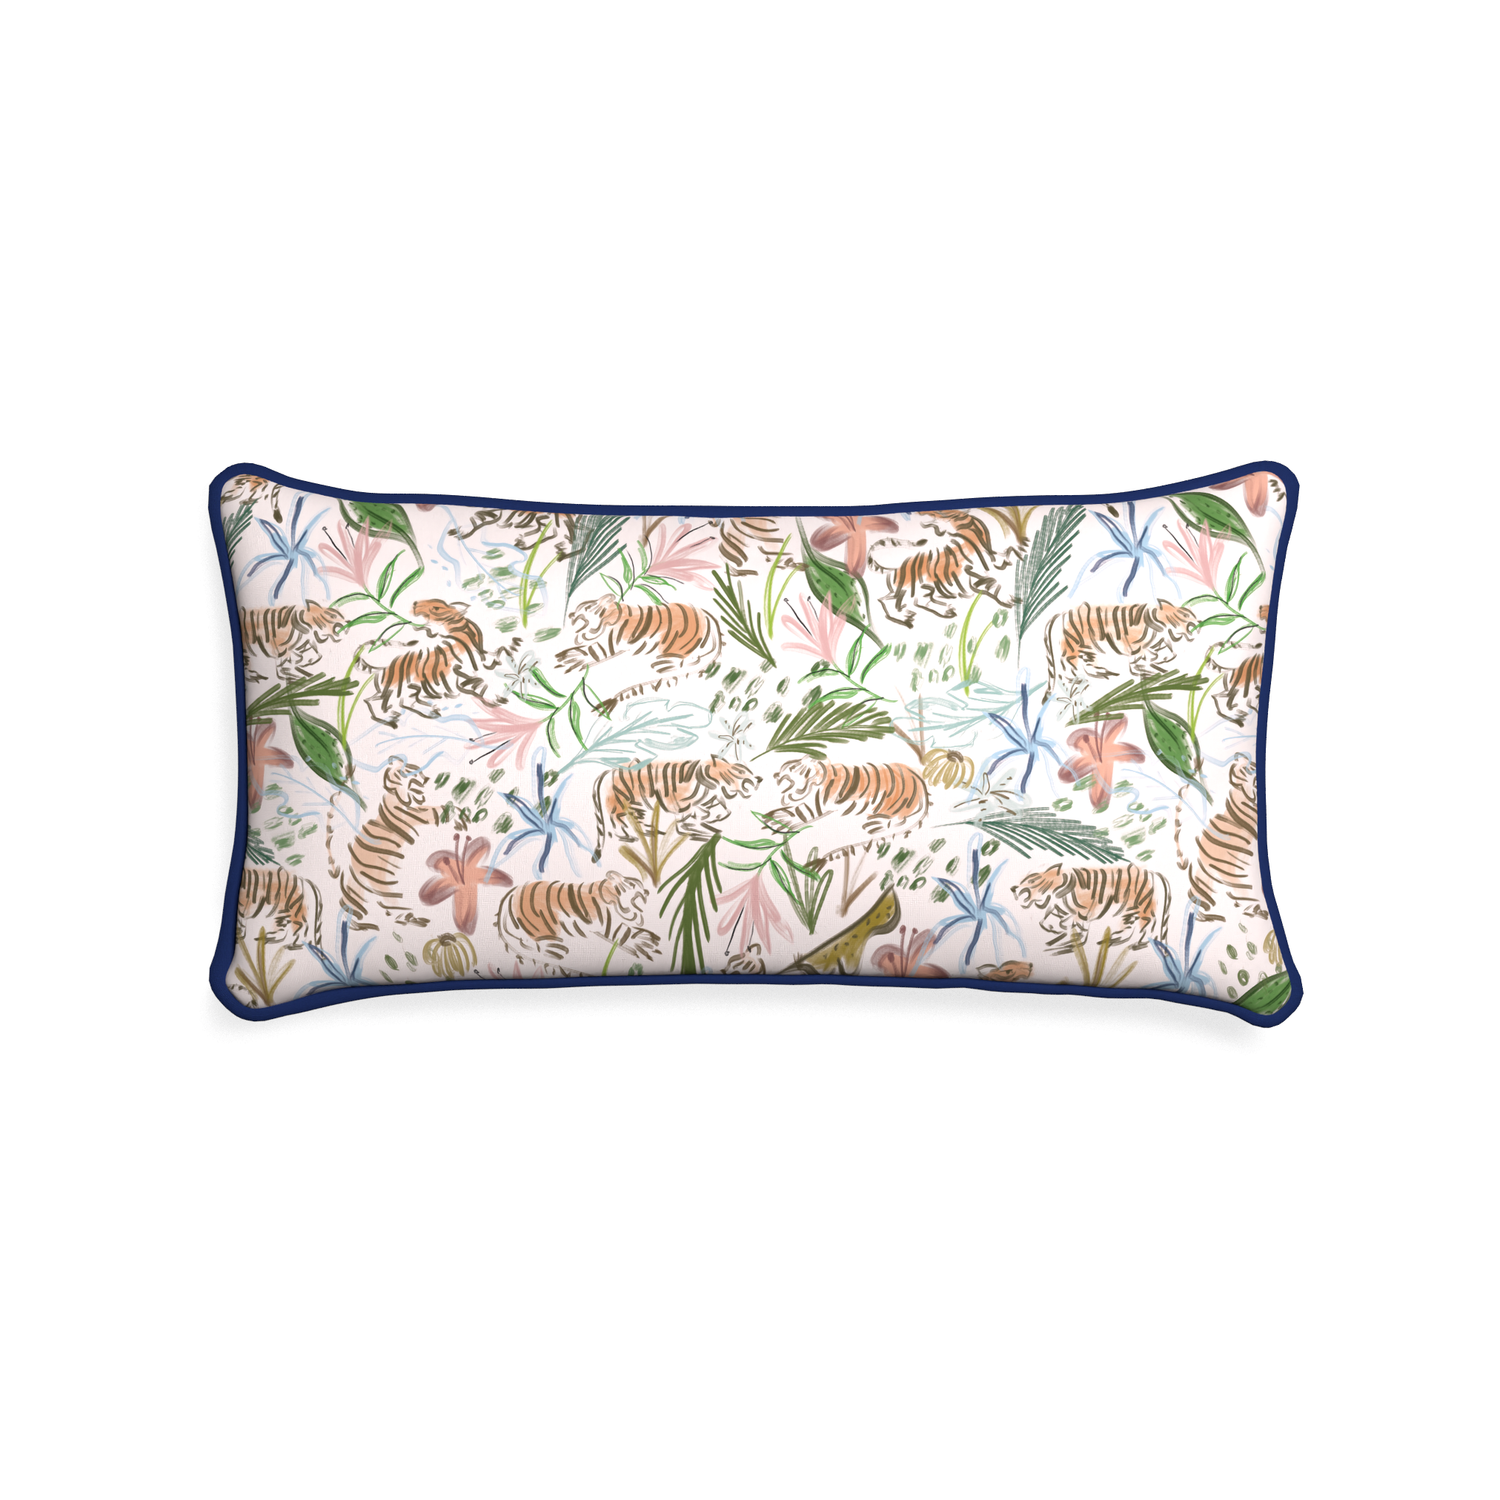 Midi-lumbar frida pink custom pink chinoiserie tigerpillow with midnight piping on white background